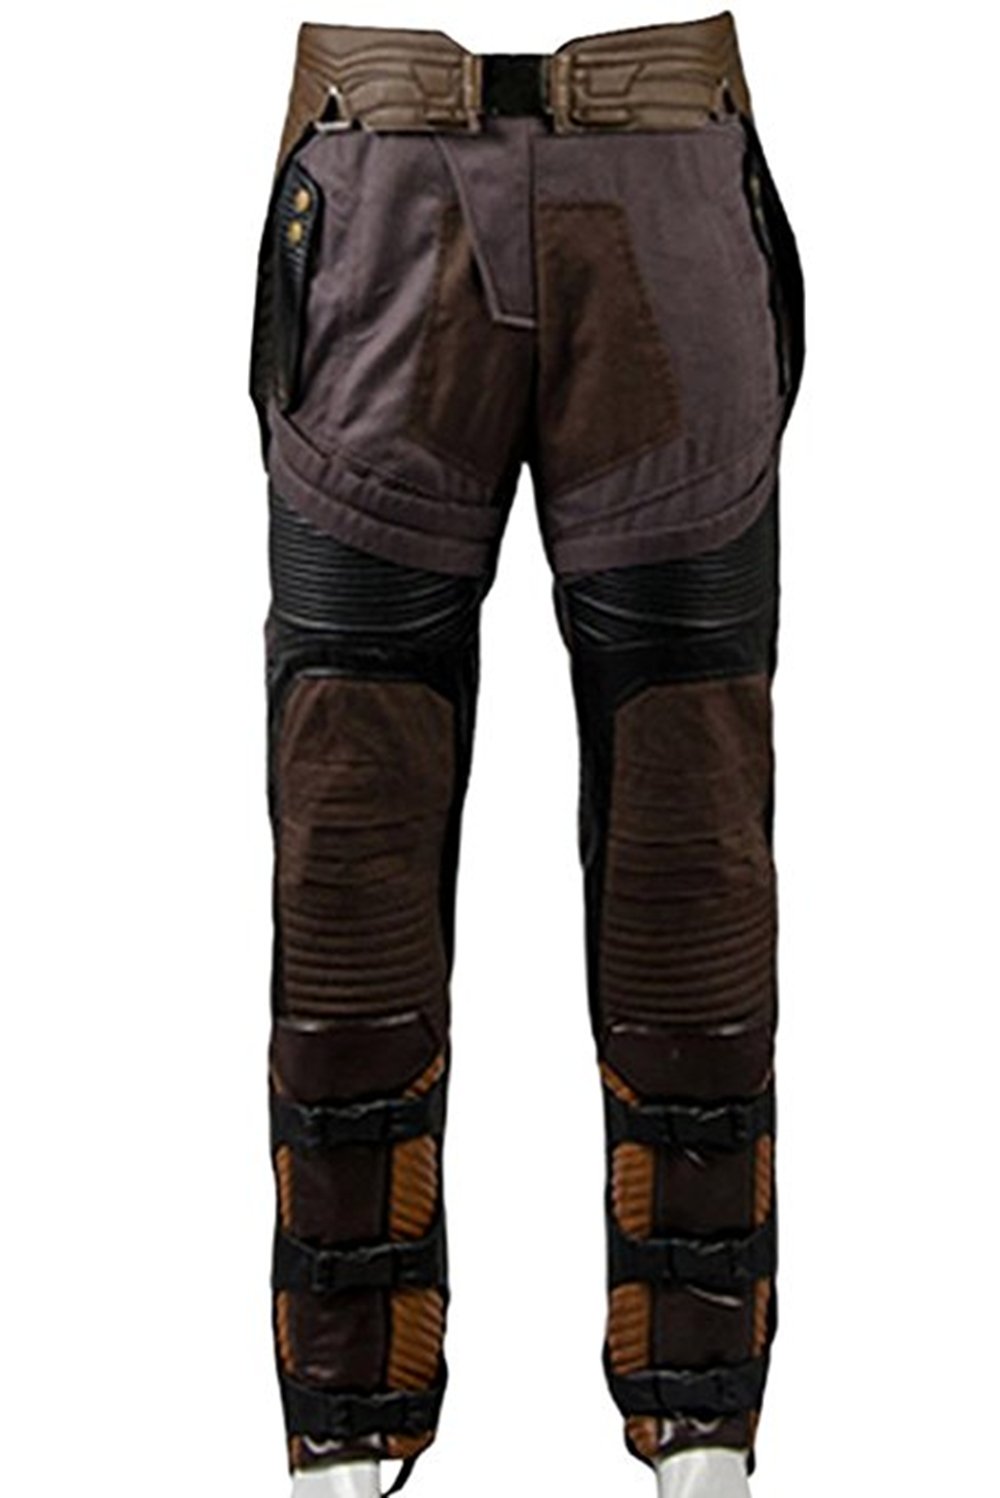 Guardians of the Galaxy 2 Peter Jason Quill Starlord Pants Only Cosplay Costume